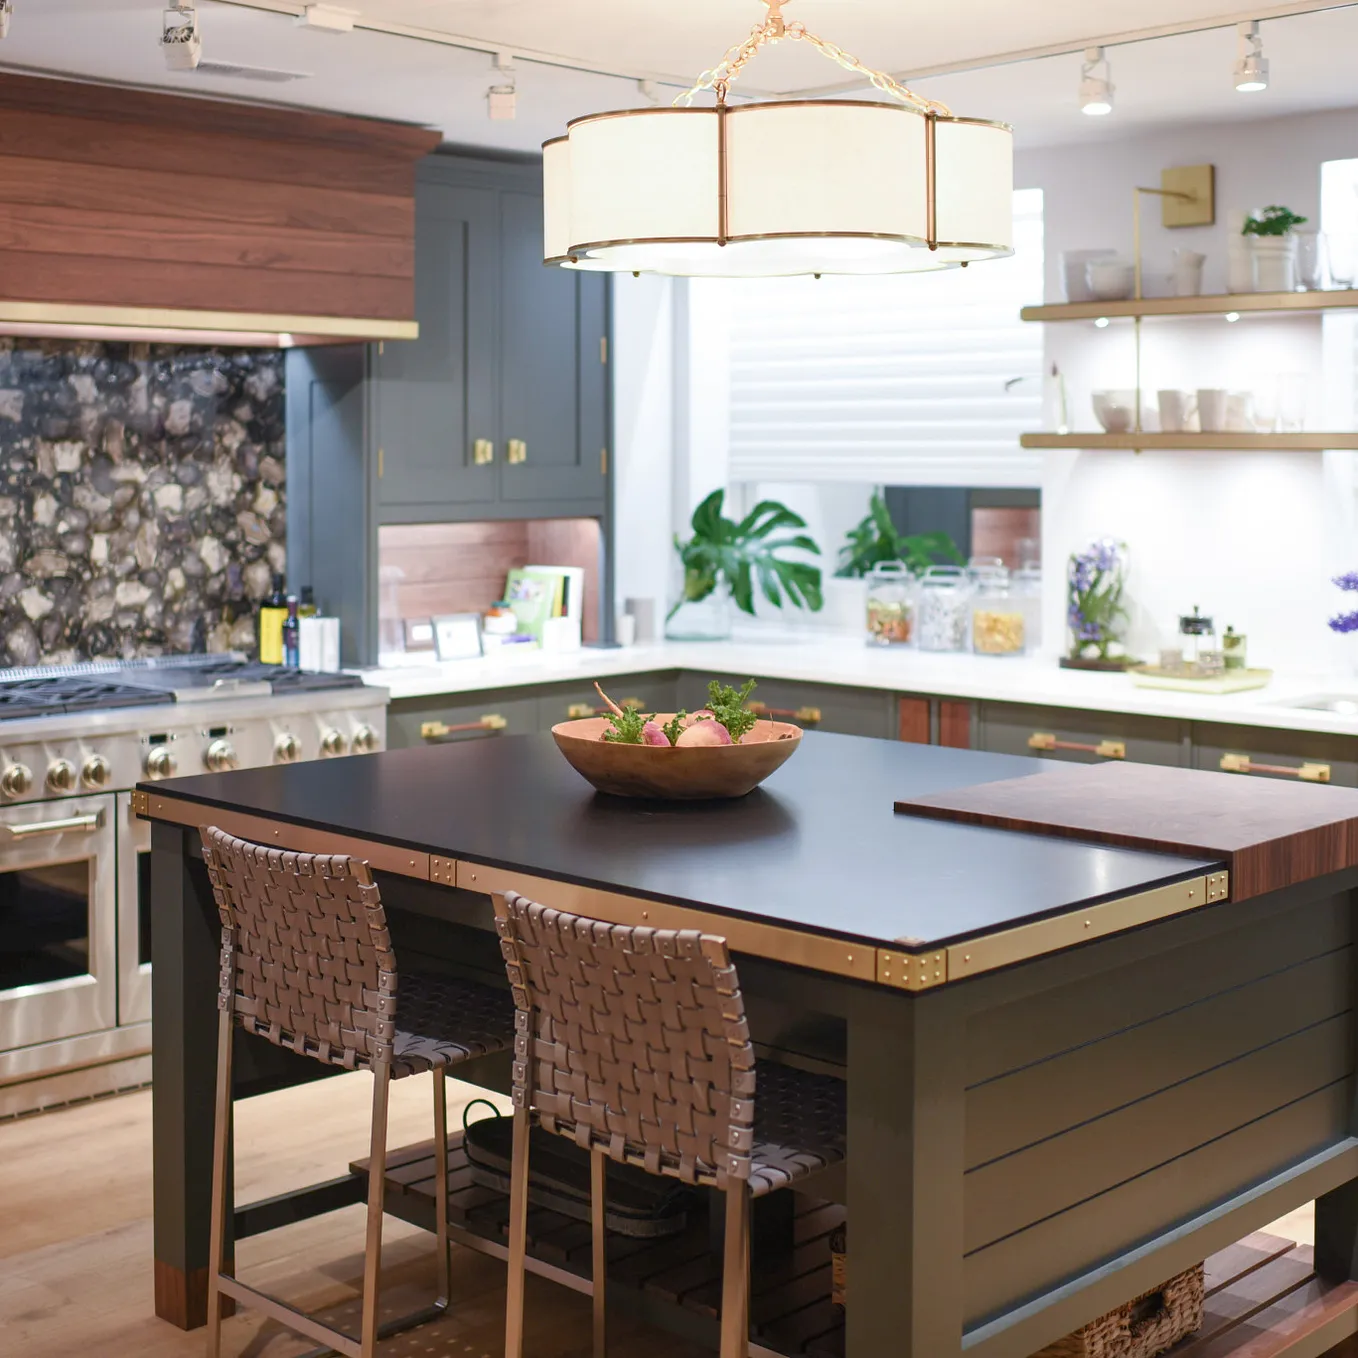 A black and wood kitchen with Cambria Blackpool Matte countertops featured in the Kips Bay Decorator Show House.